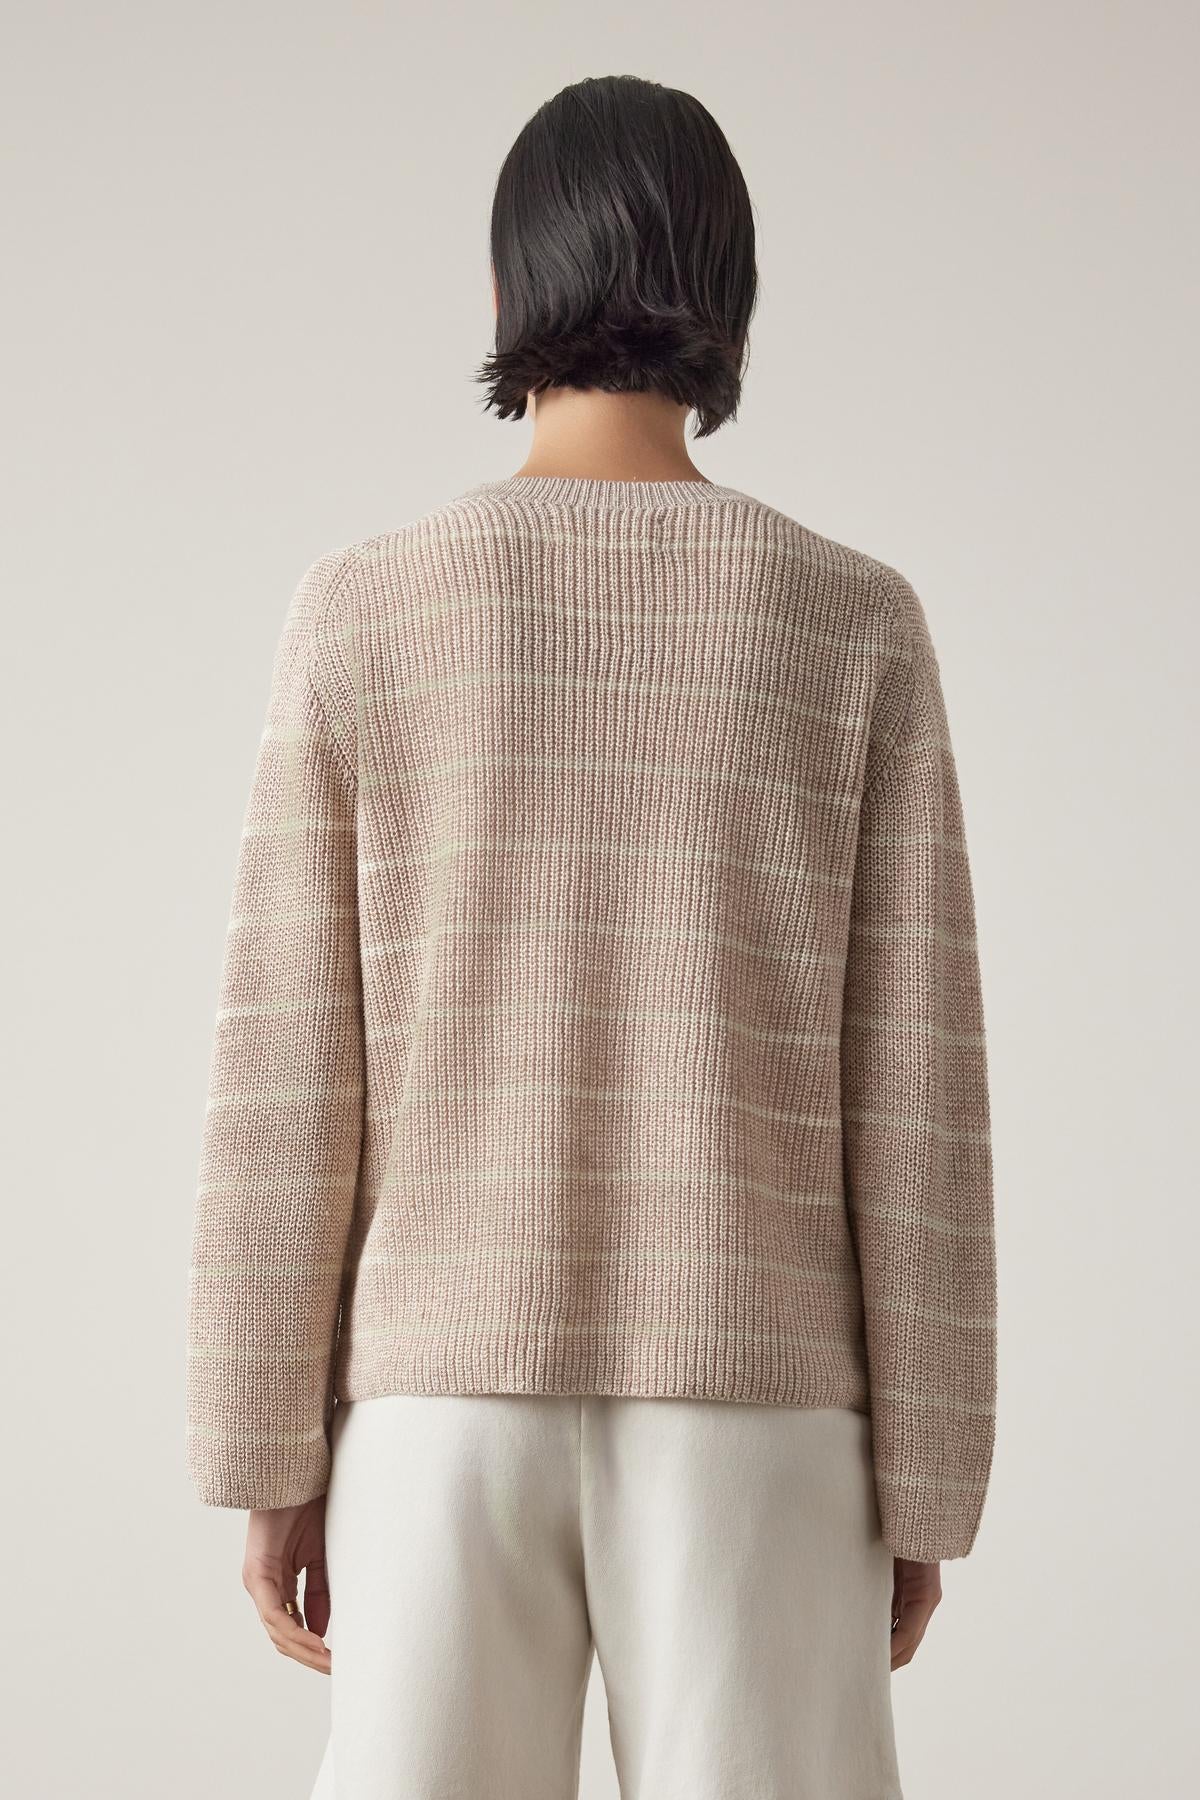 Rear view of a person with short dark hair wearing a beige ribbed Indio Linen Sweater by Velvet by Jenny Graham and white pants against a light beige background.-36863295029441